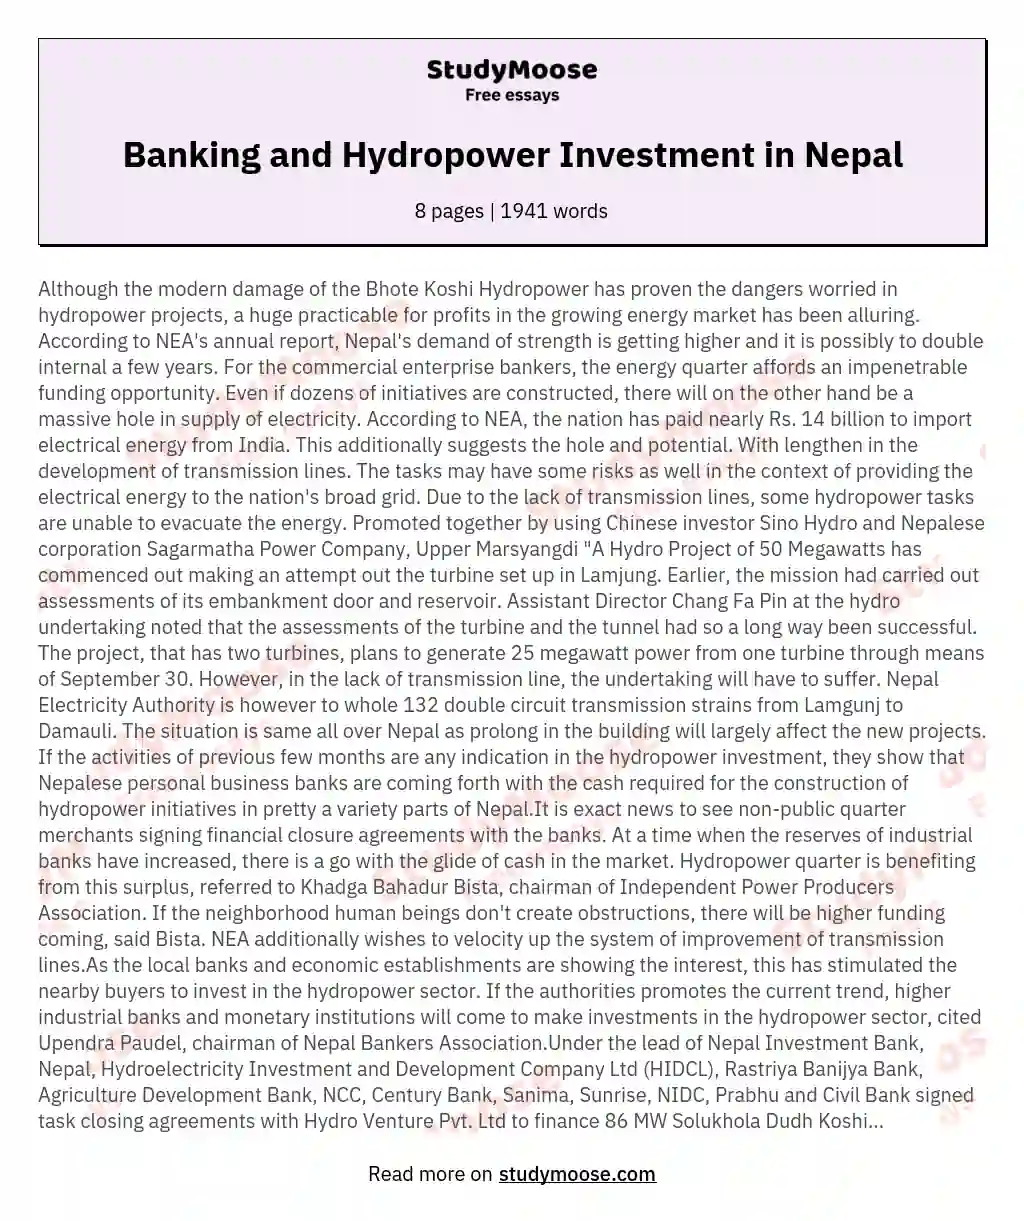 Banking and Hydropower Investment in Nepal essay